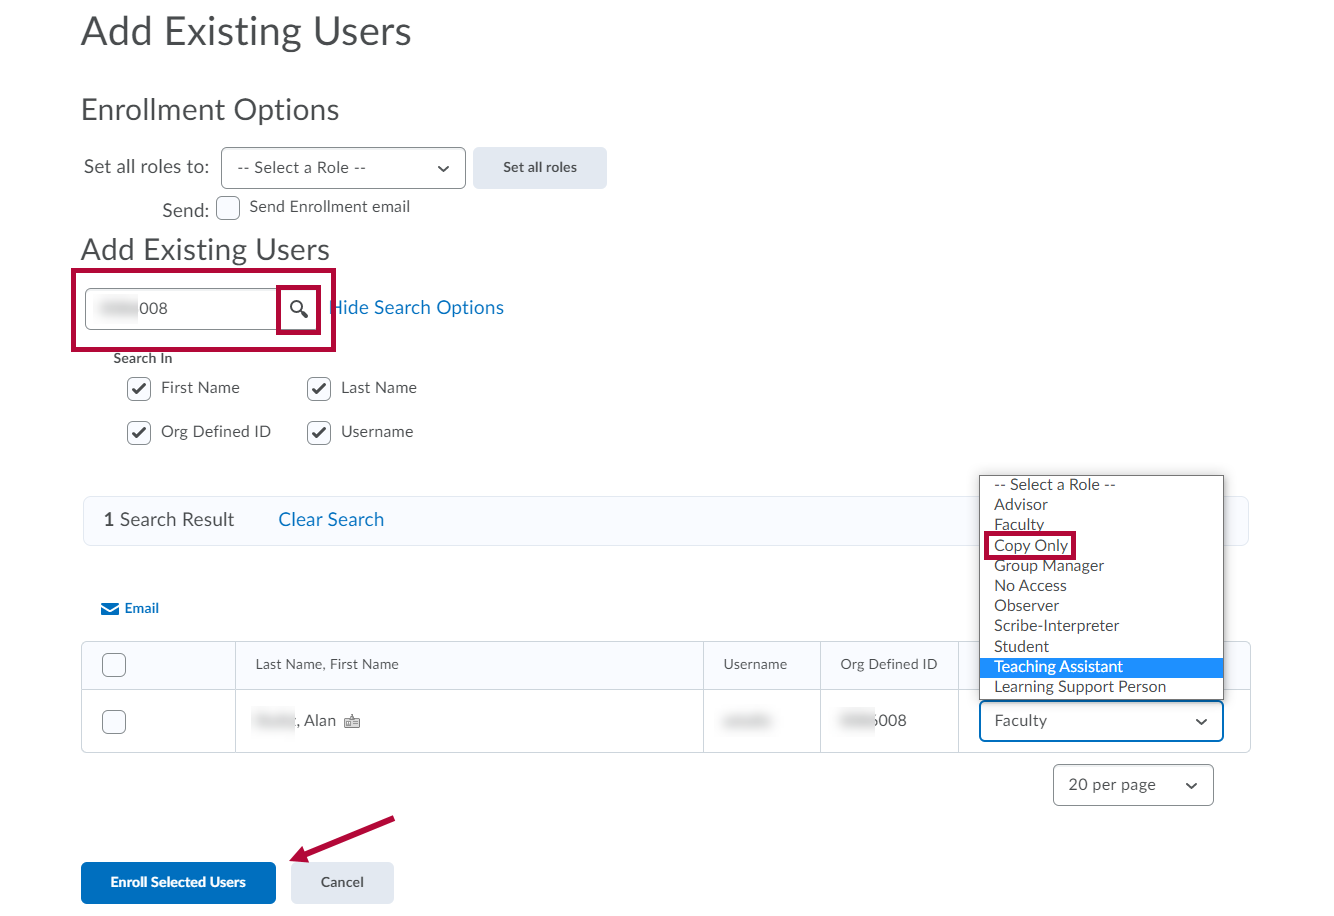 Add Existing Users search with ID field and initiate seach and Copy nly role identified and indicates Enroll Selected Users location.